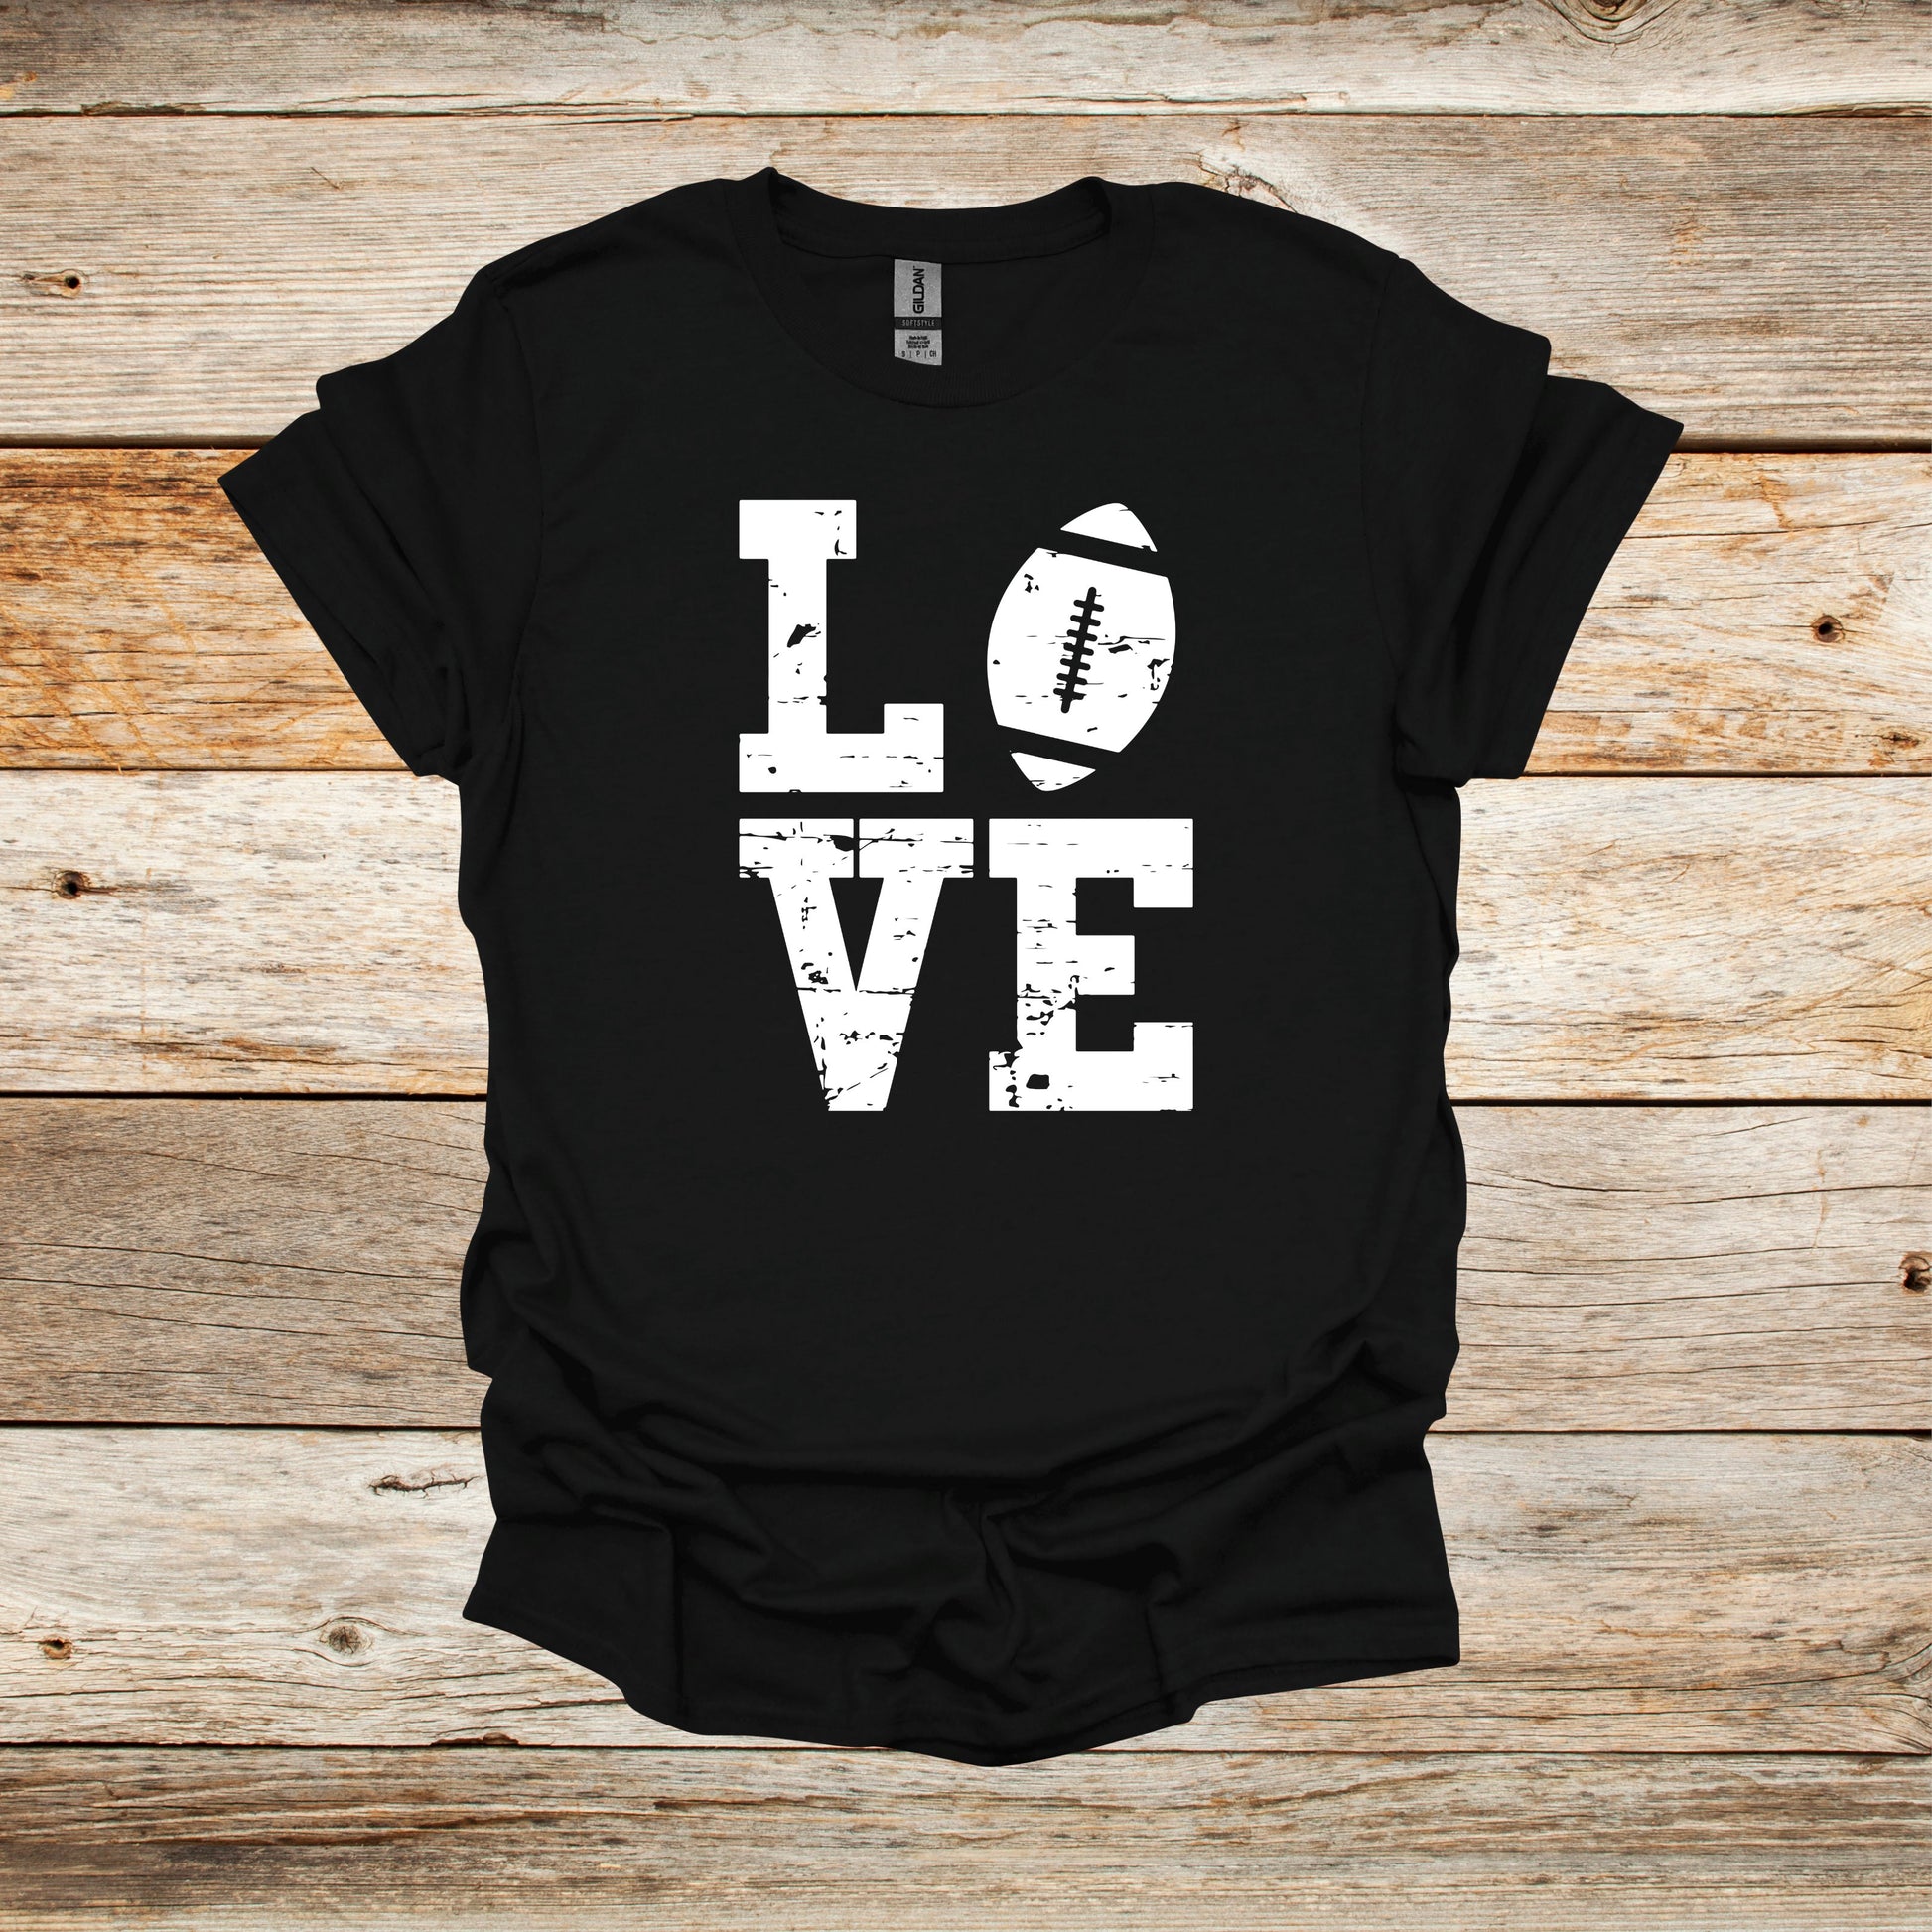 Football T-Shirt - LOVE - Adult and Children's Tee Shirts - Sports T-Shirts Graphic Avenue Black Adult Small 